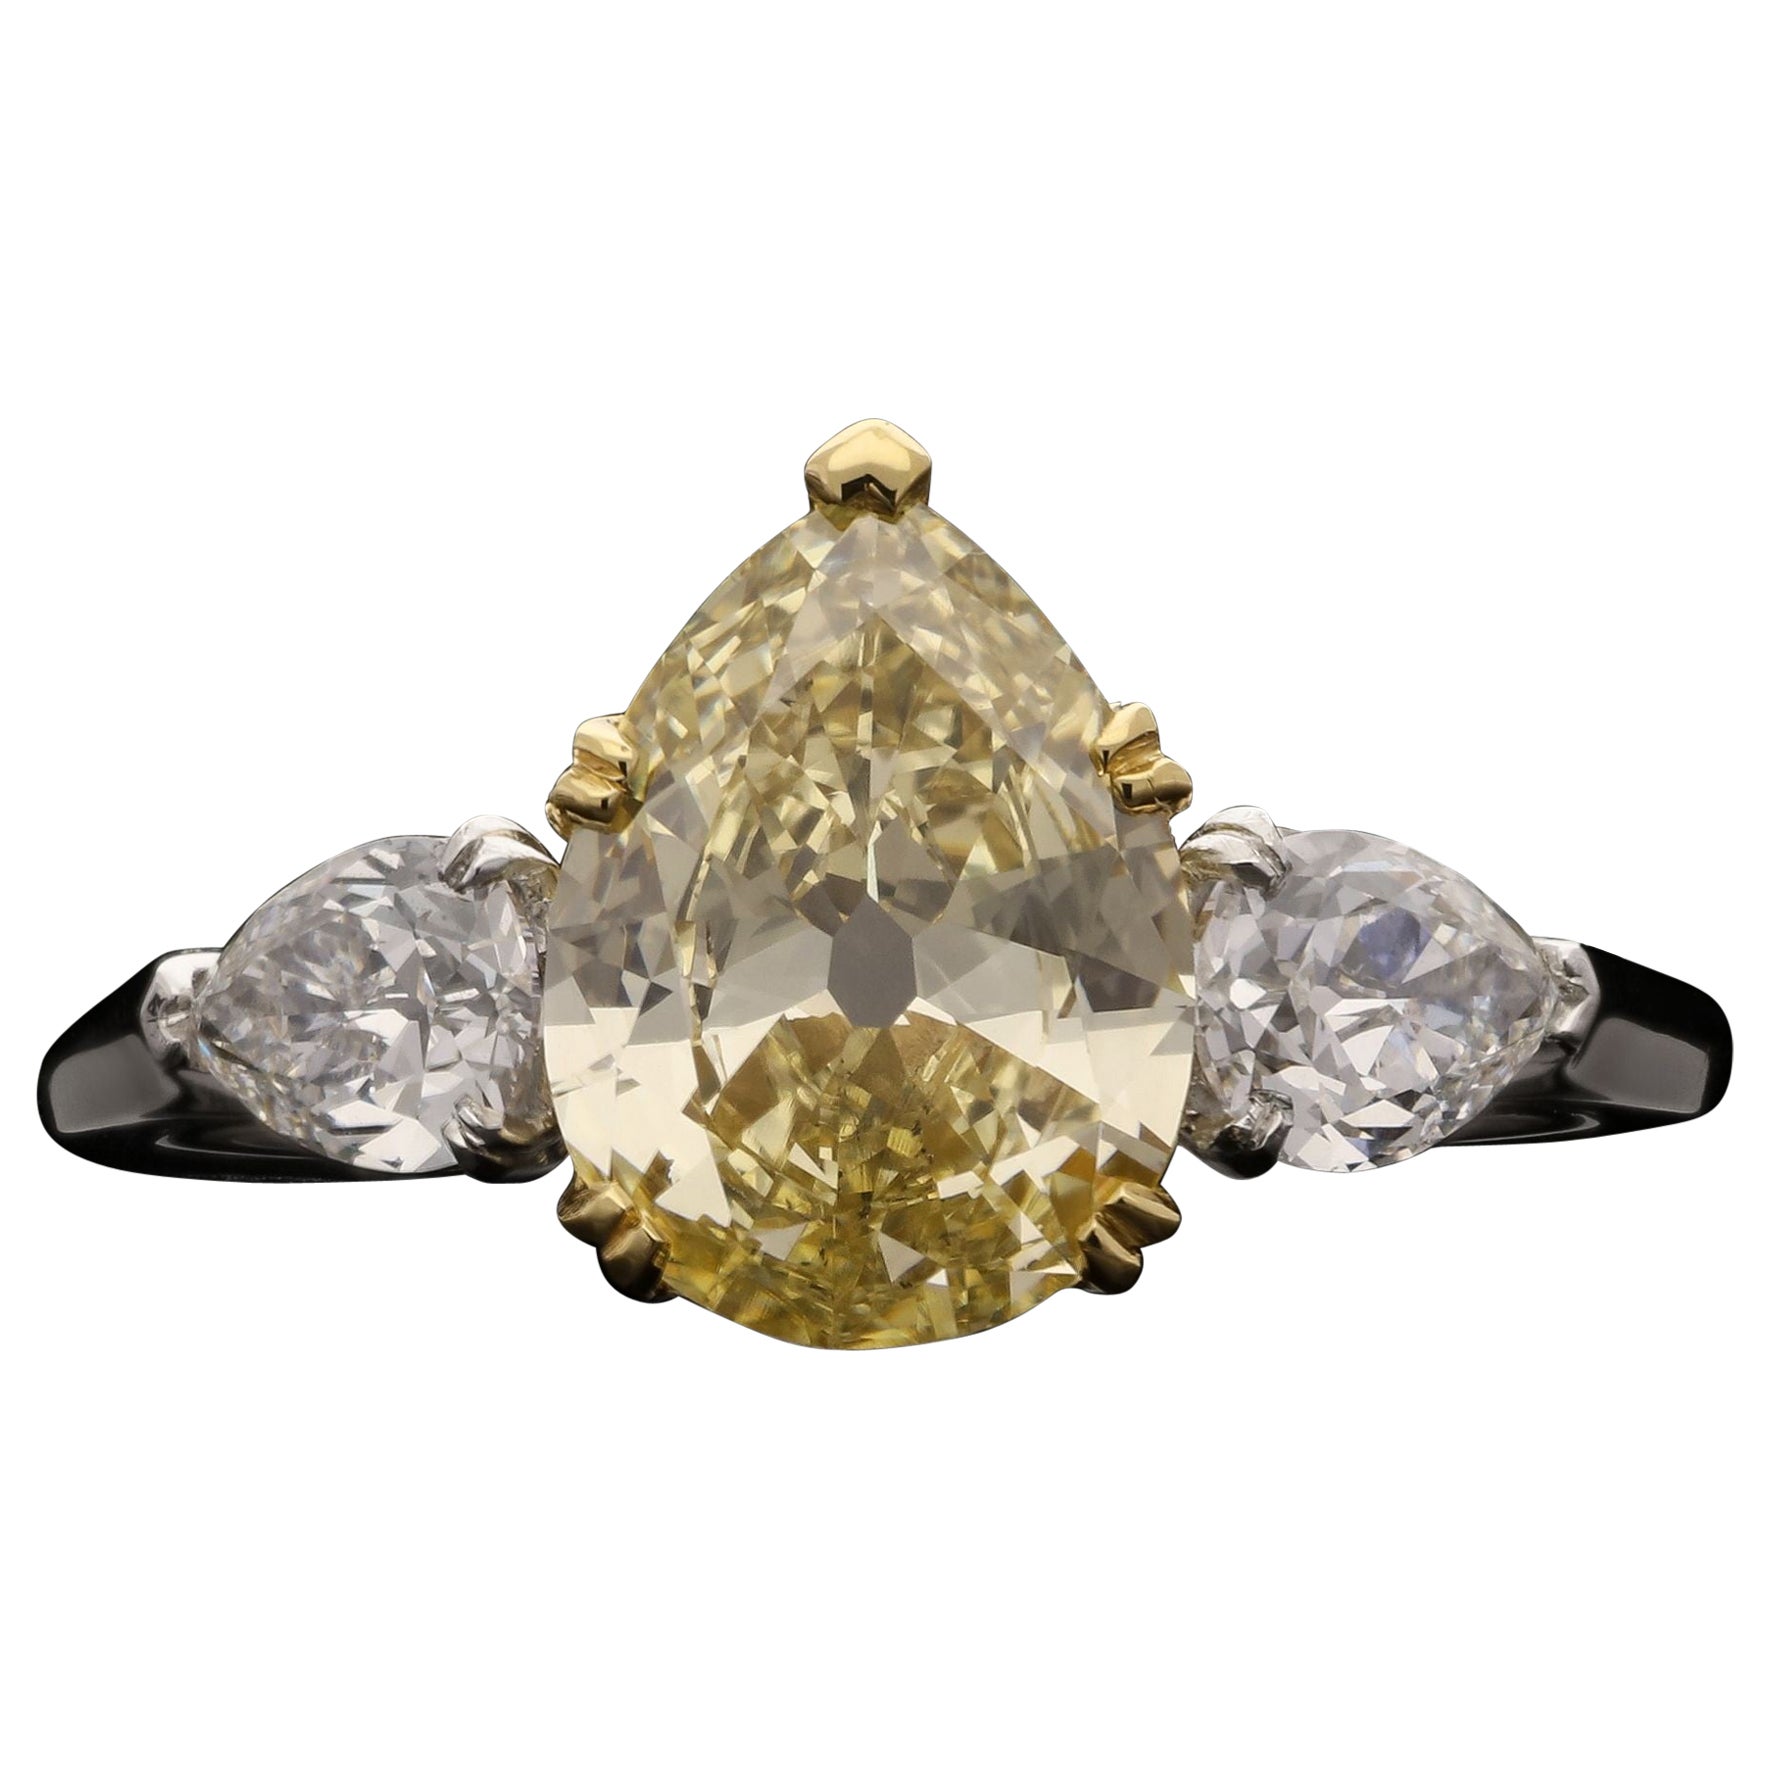 Hancocks 1.49ct Fancy Yellow Old Cut Pear Shape Diamond Ring With Pear Shoulders For Sale